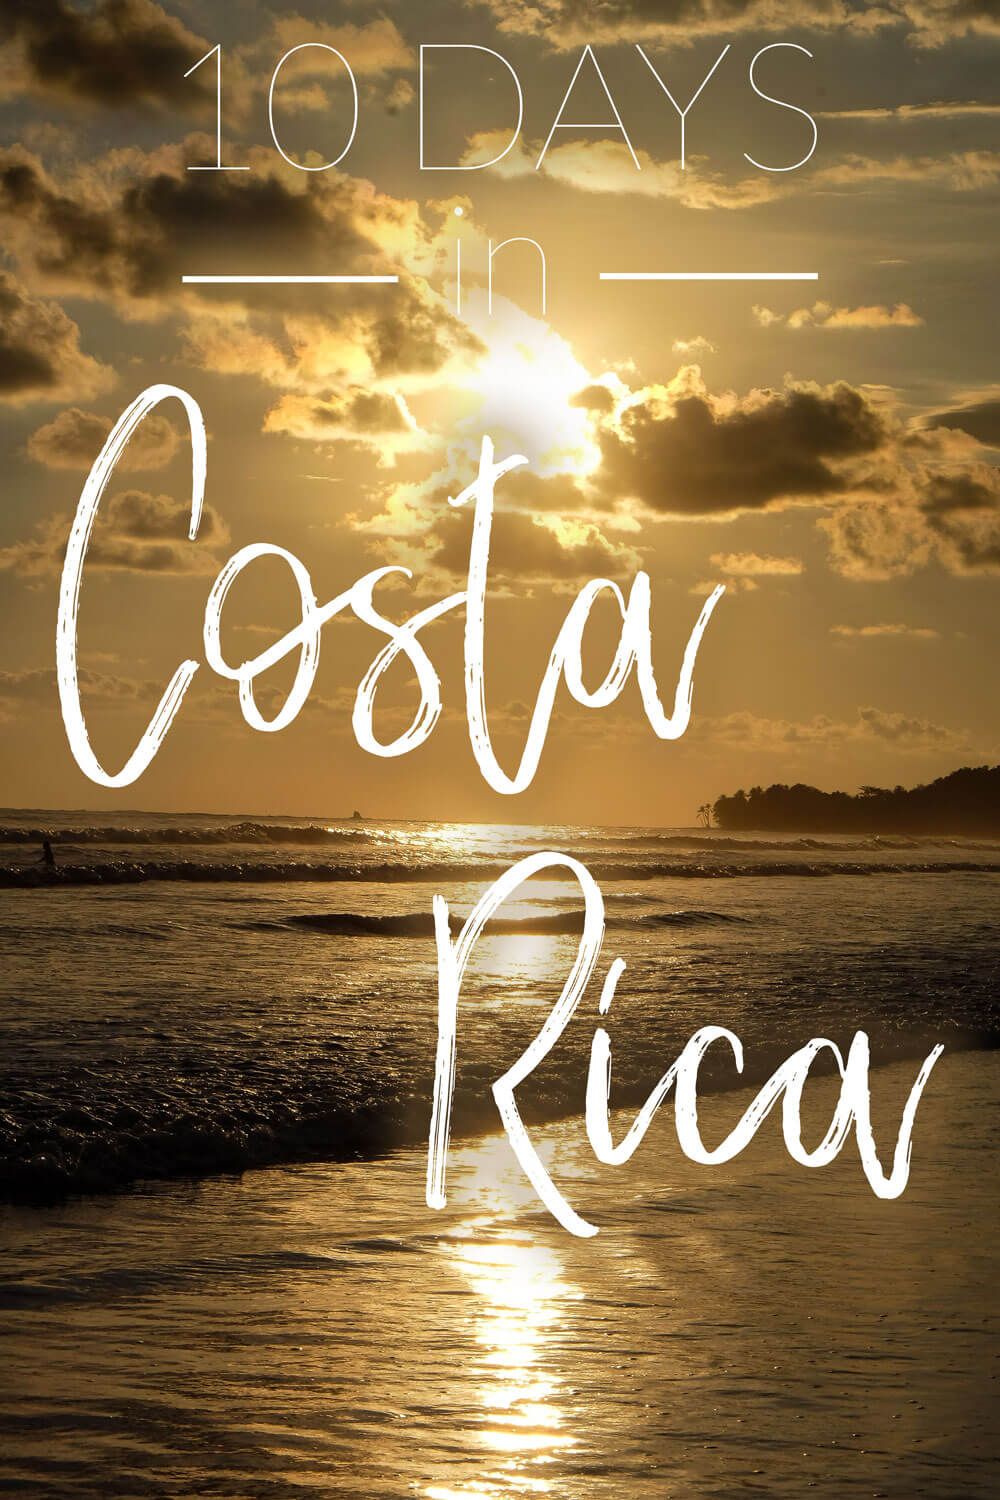 Costa Rica Itinerary: 10 Days By The Mountains & Beach